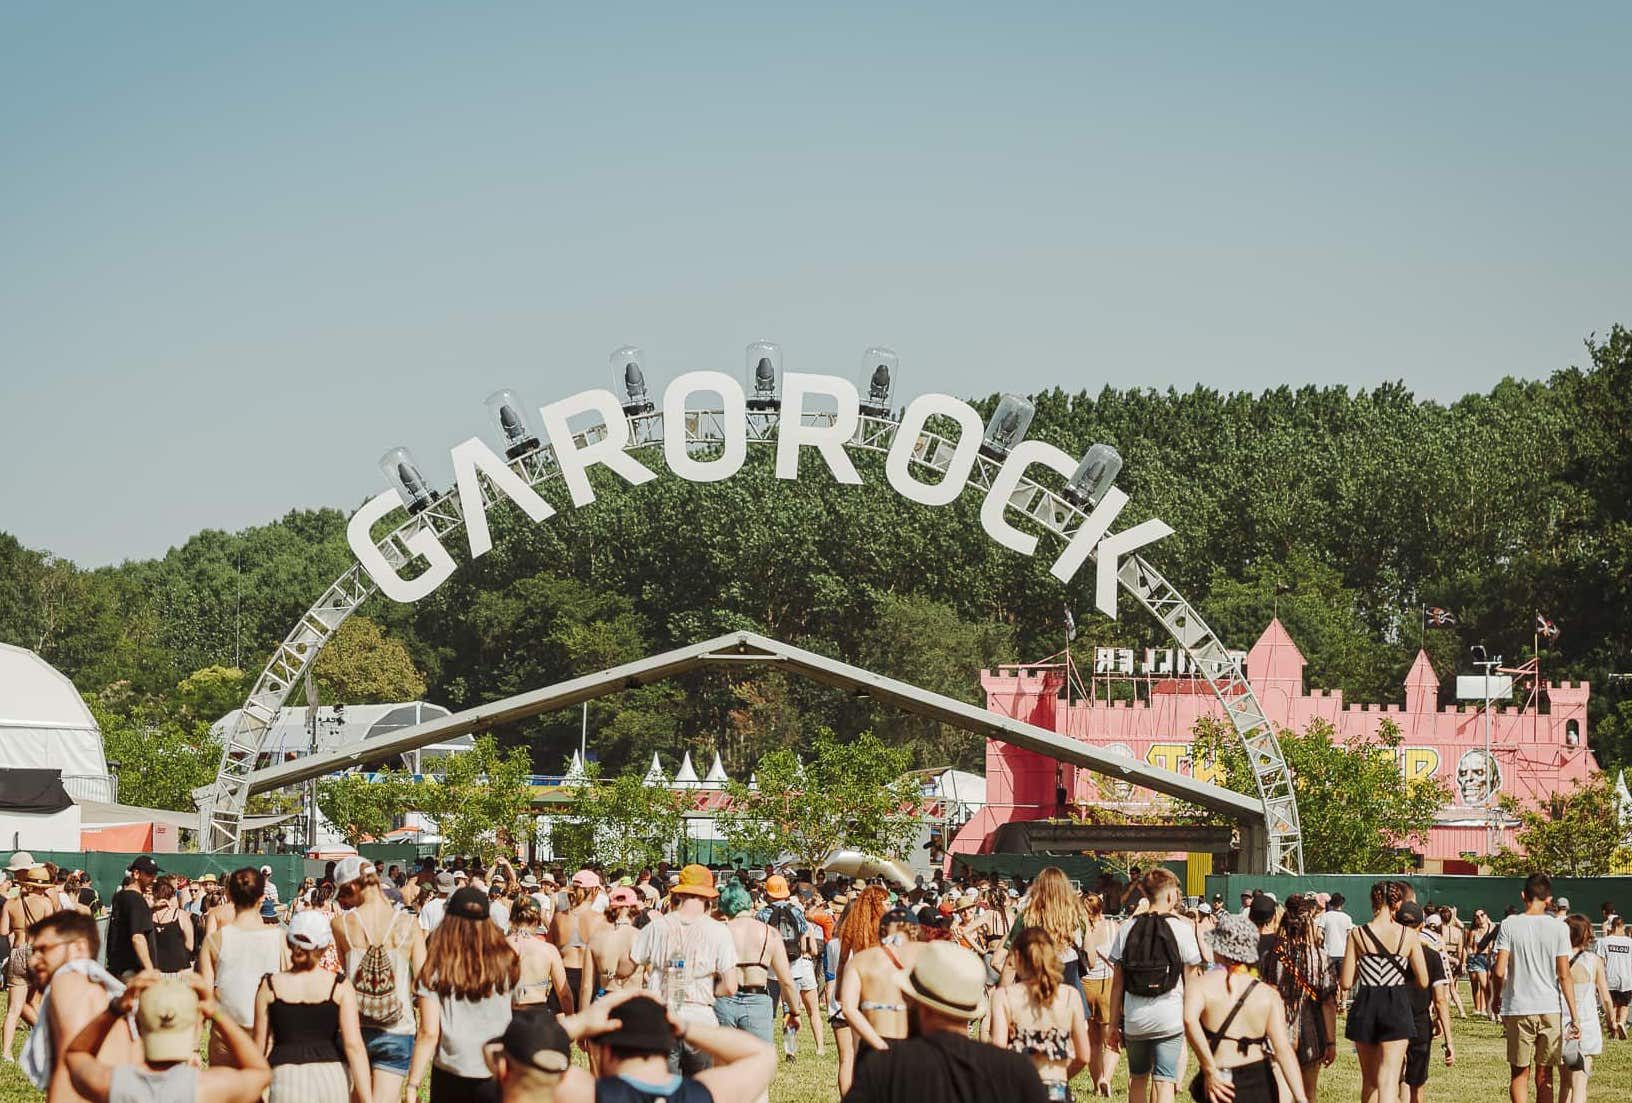 Garorock is a festival that takes you out of your comfort zone